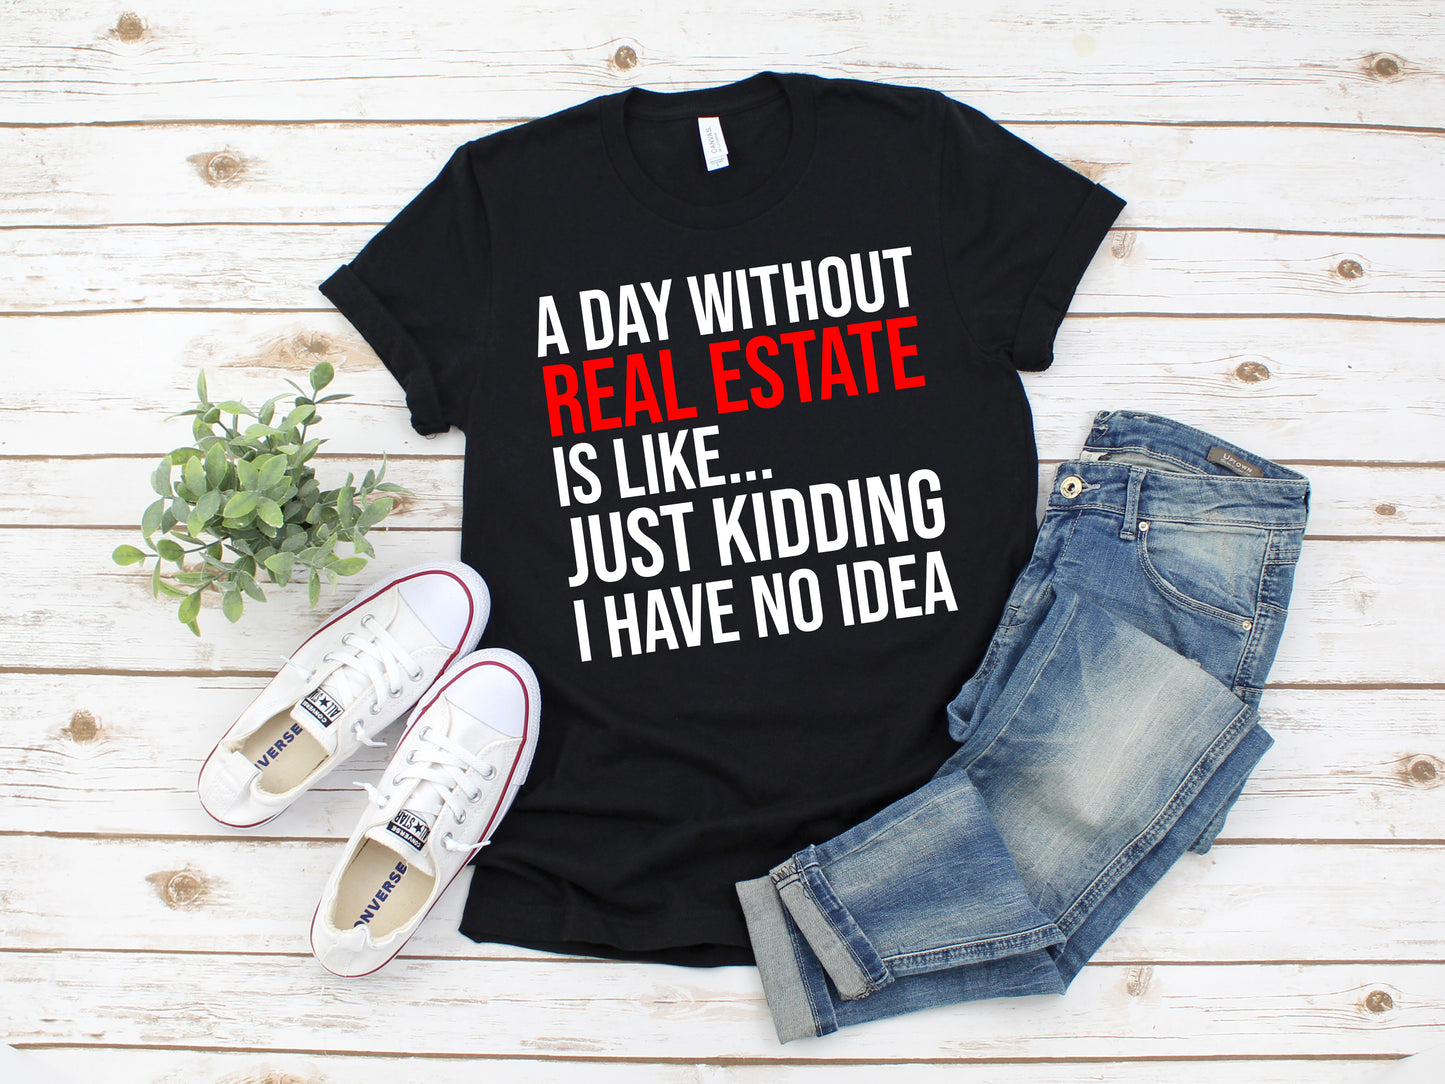 A Day Without Real Estate Is Like...